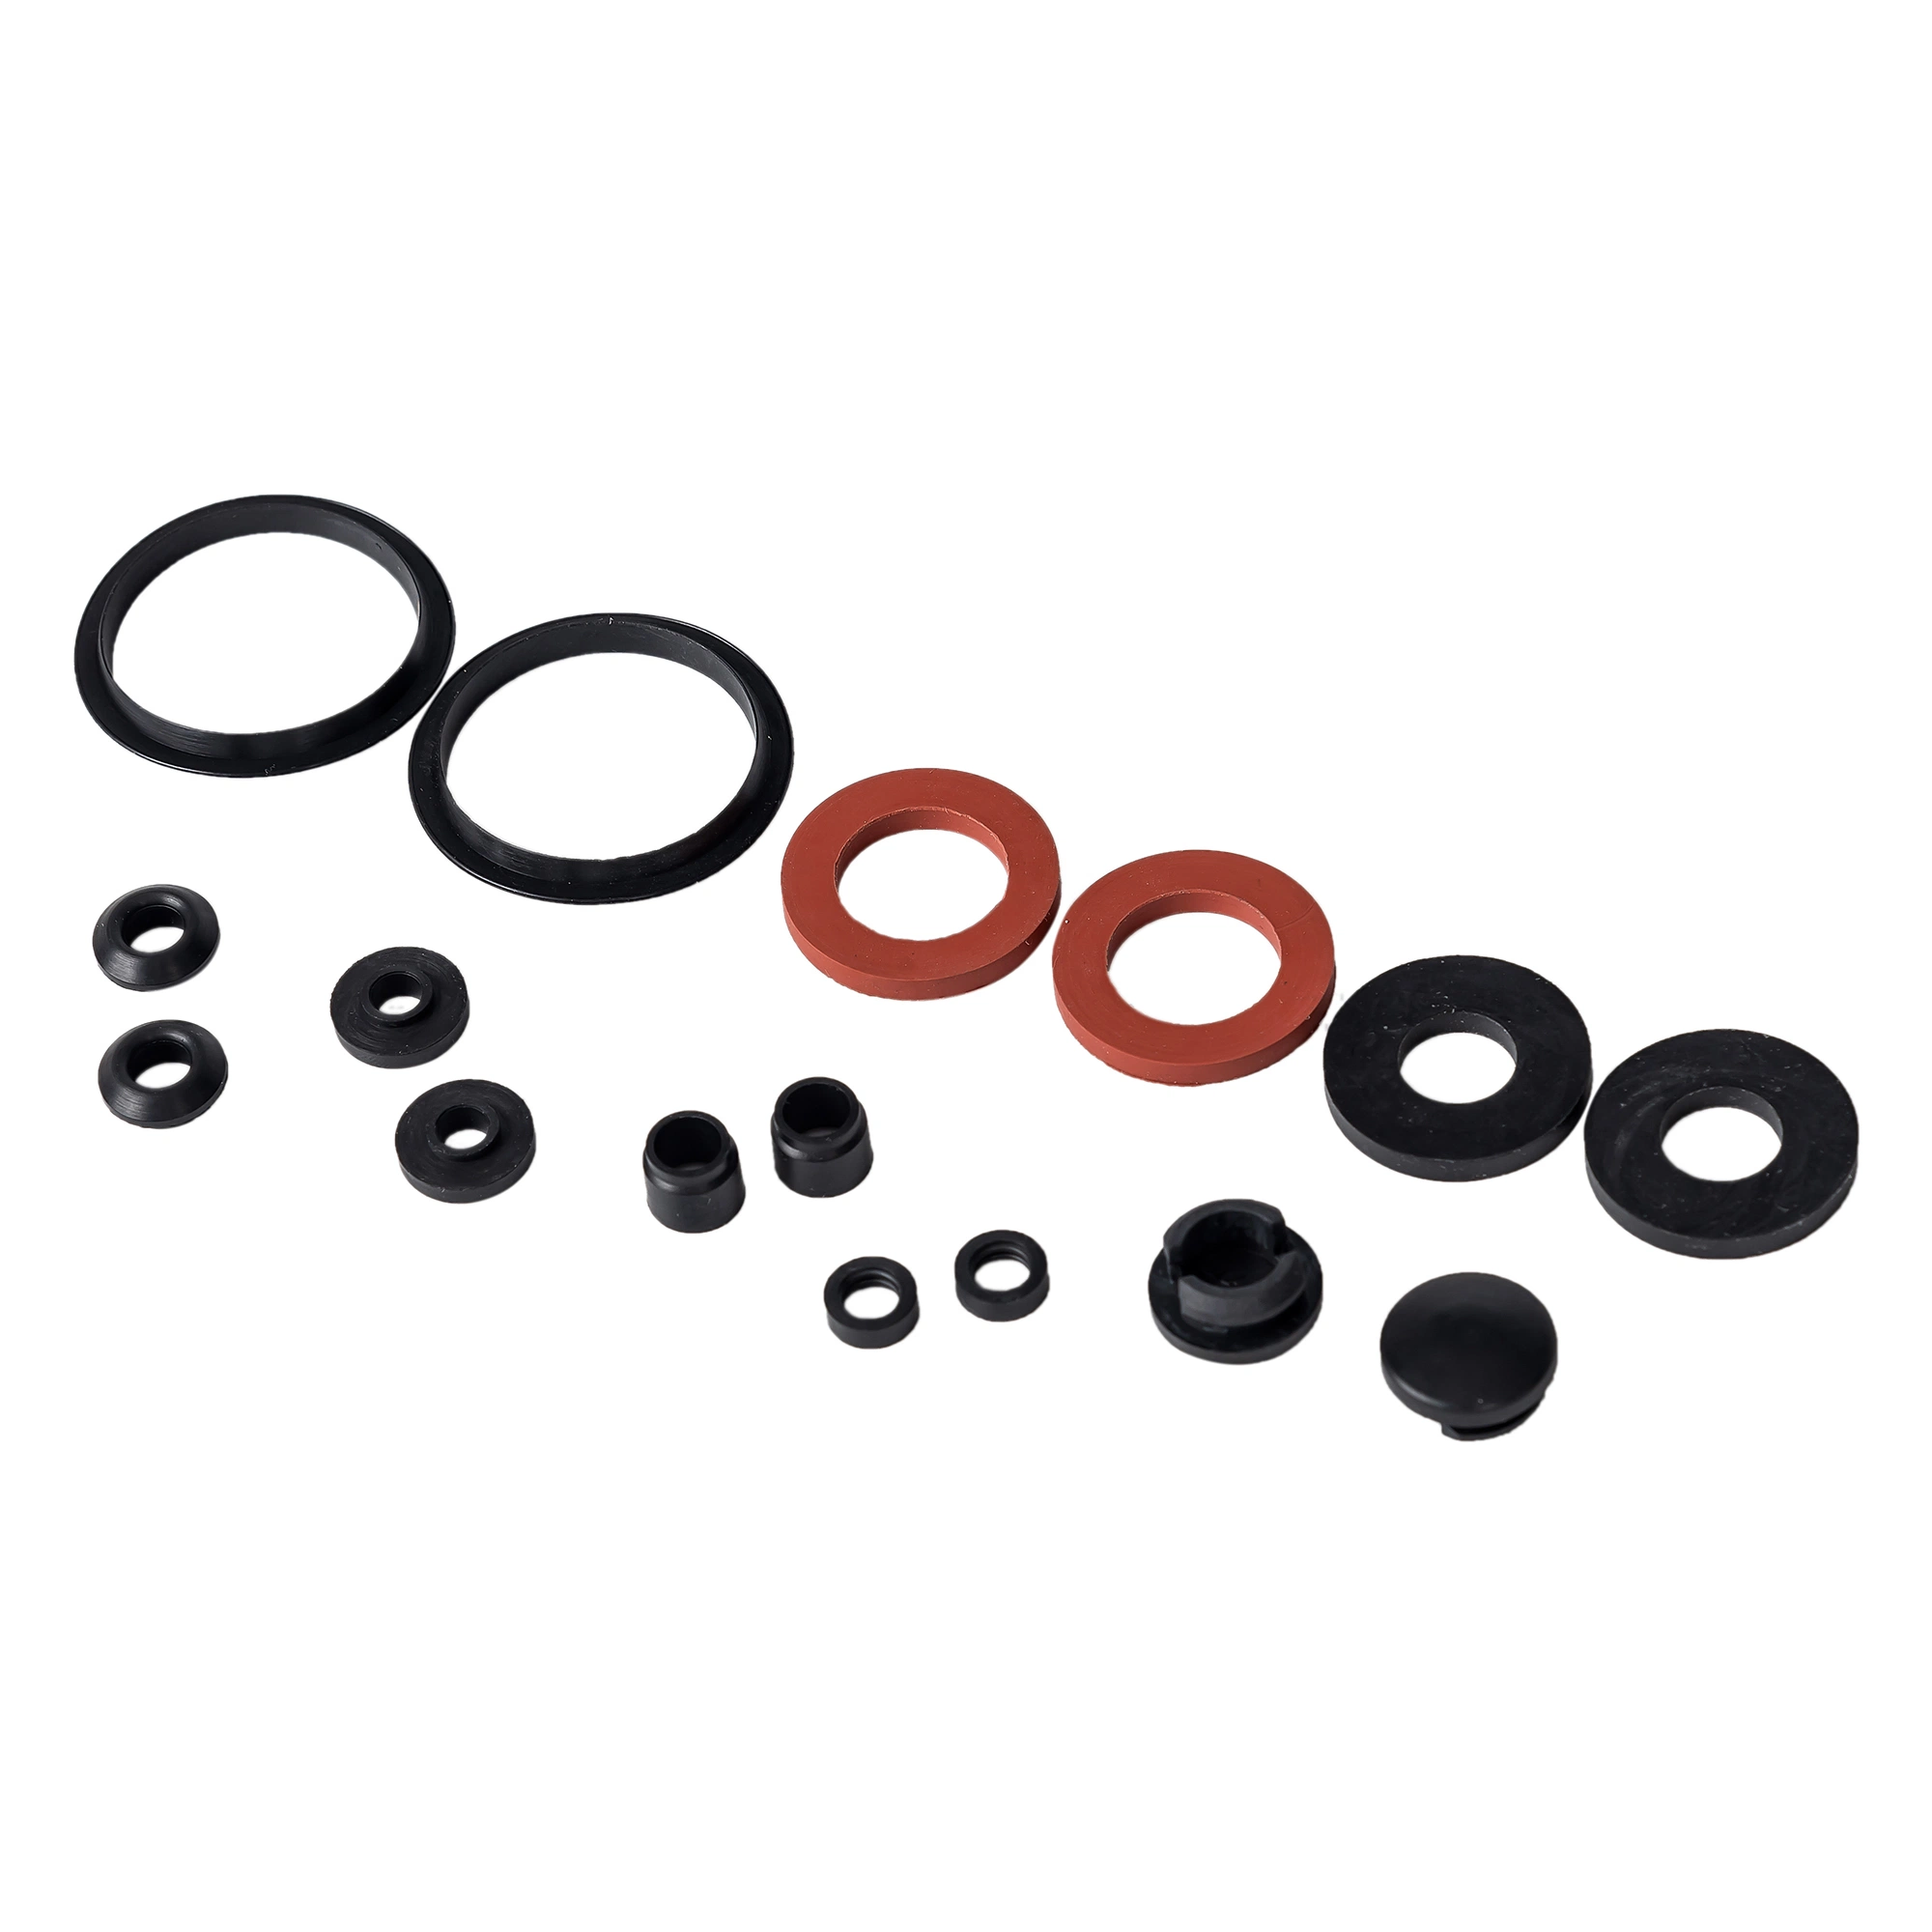 Wholesale/Supplier NBR/HNBR/FKM/EPDM/Cr/Sil Silicone Rubber Product Mechanical Oil Seal O Ring